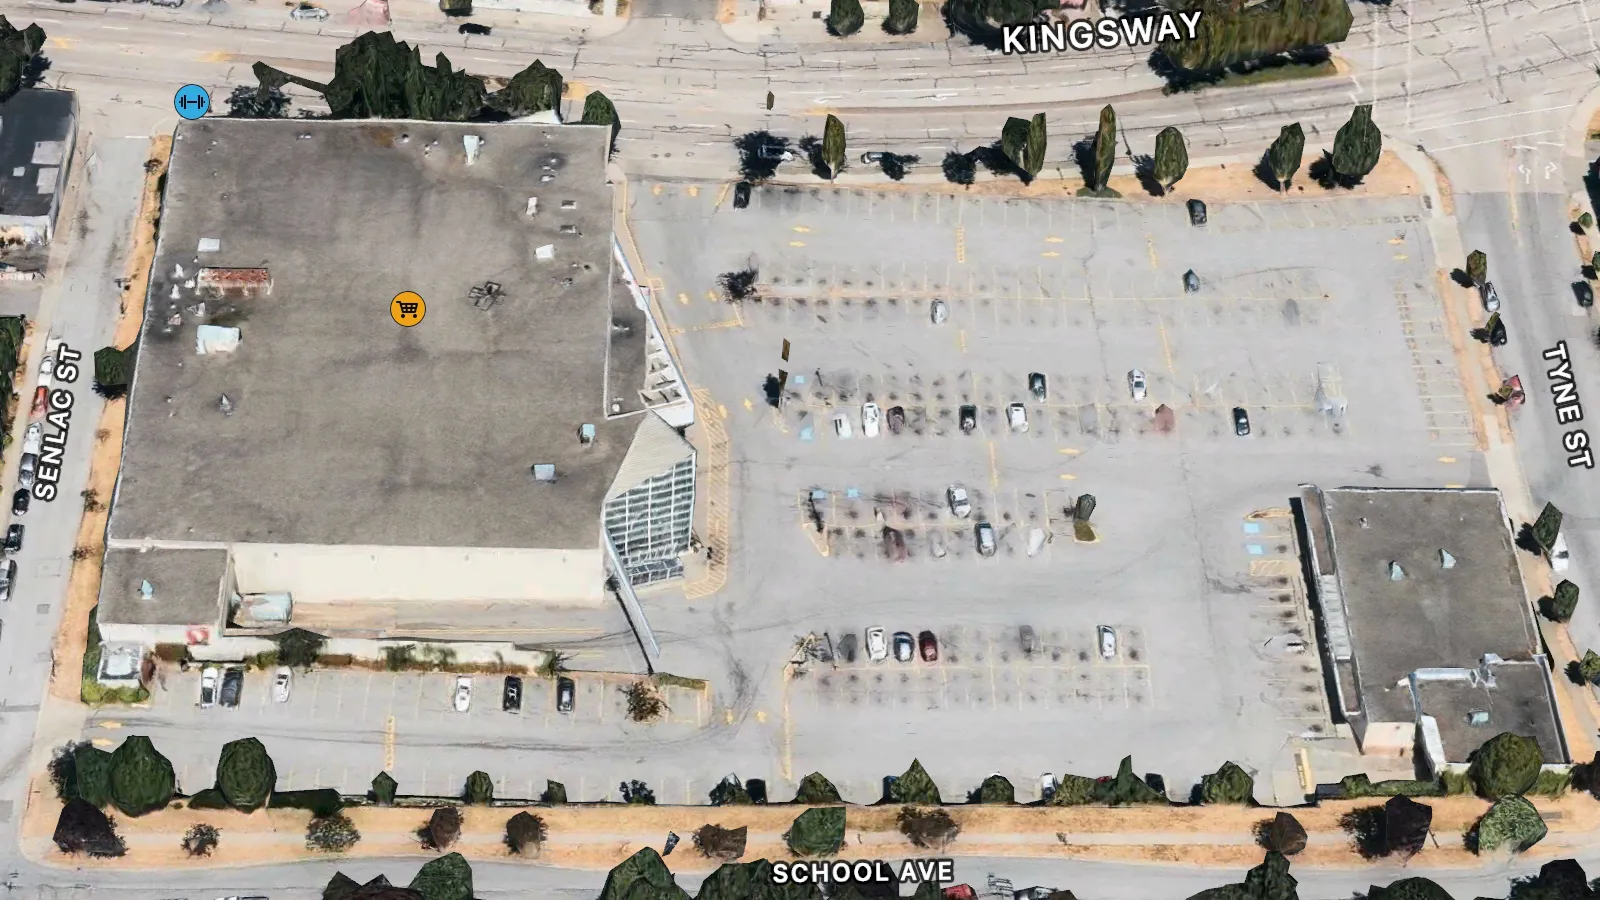 An aerial photo of a supermarket. The building takes up roughly 40% of the image, while the parking lot takes up the rest. There are not very many cars parked in the lot.